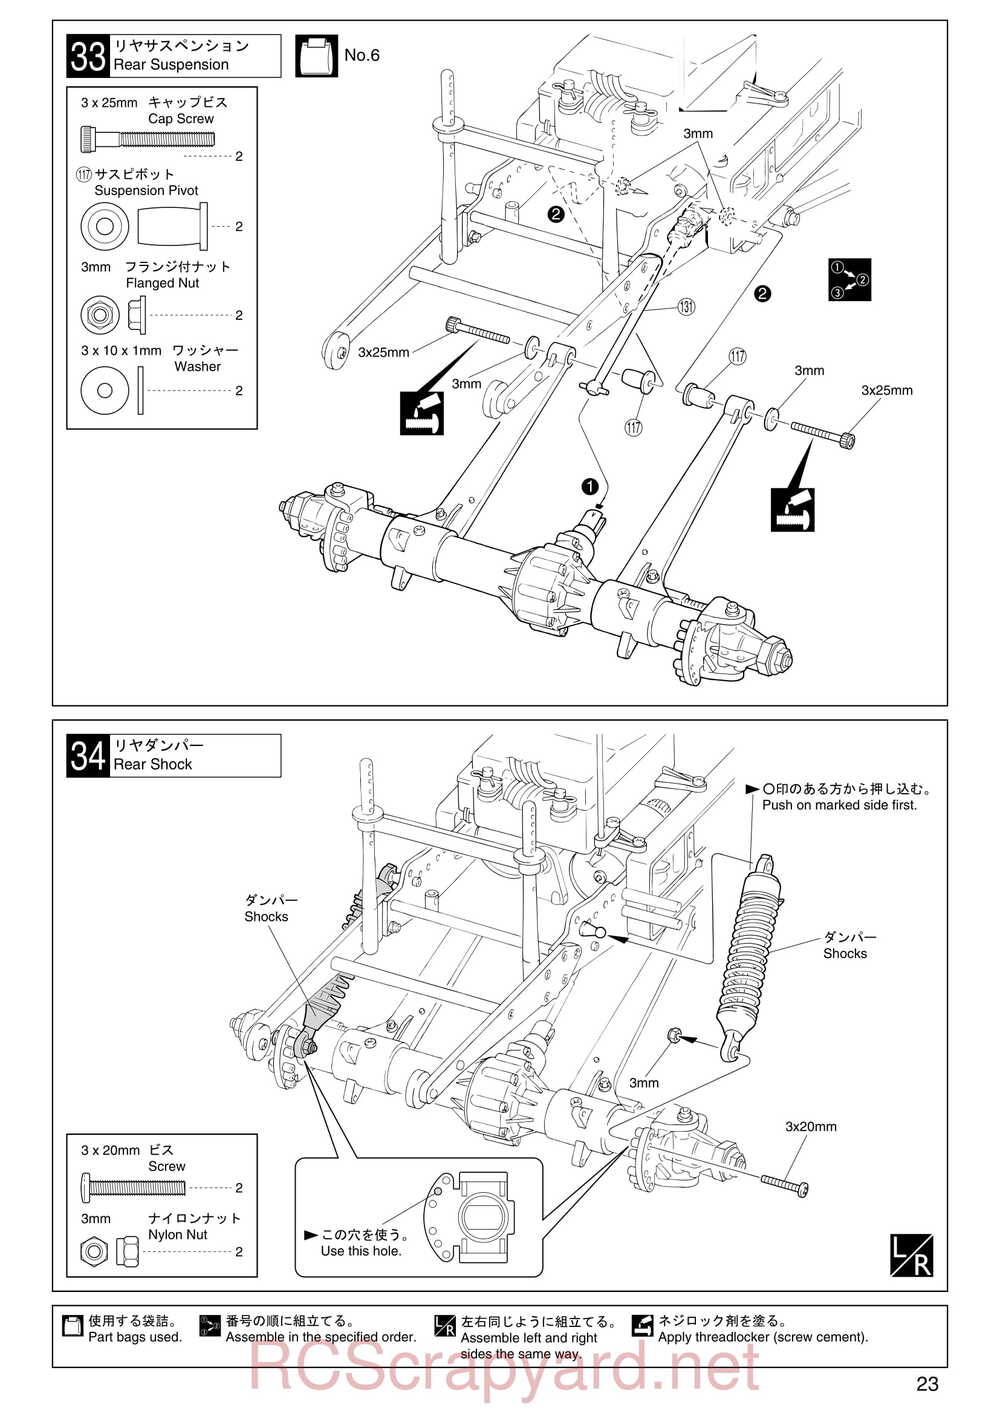 Kyosho - 30522b - Twin-Forcec-SP - Manual - Page 23